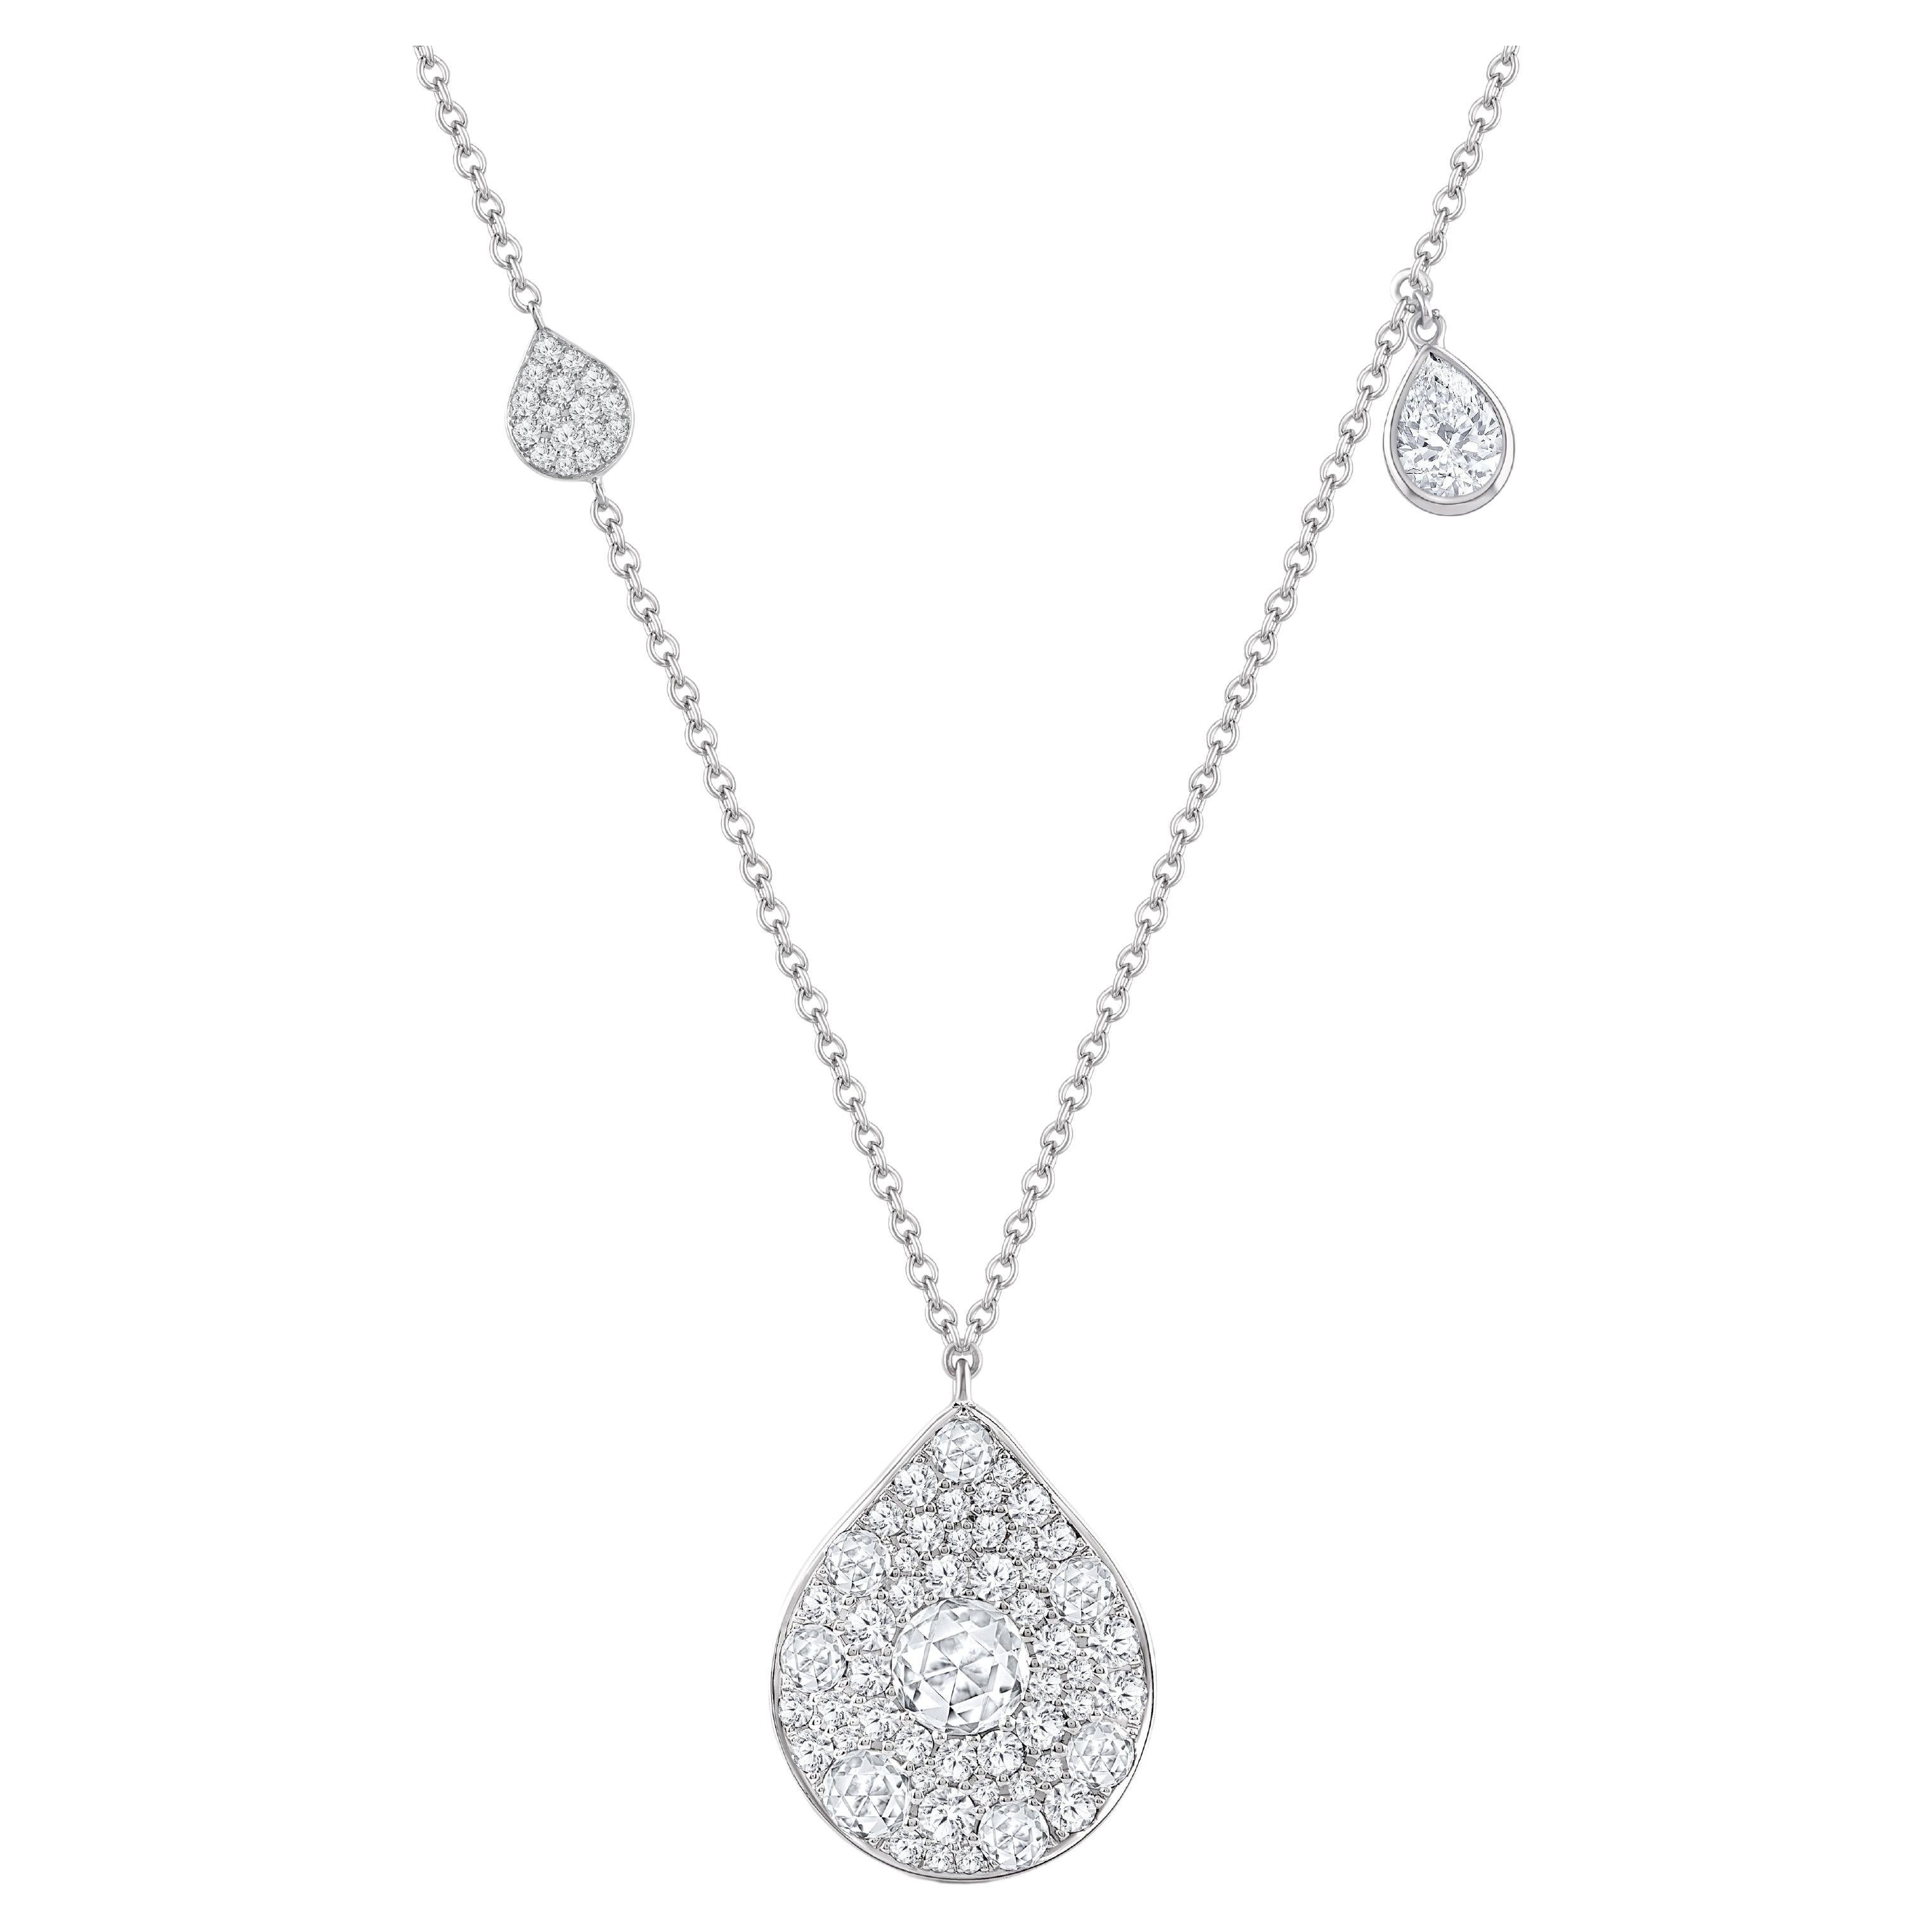 HARAKH 1 1/5 CT Colorless Diamond Tear Drop Pendant Necklace in 18 Kt White Gold